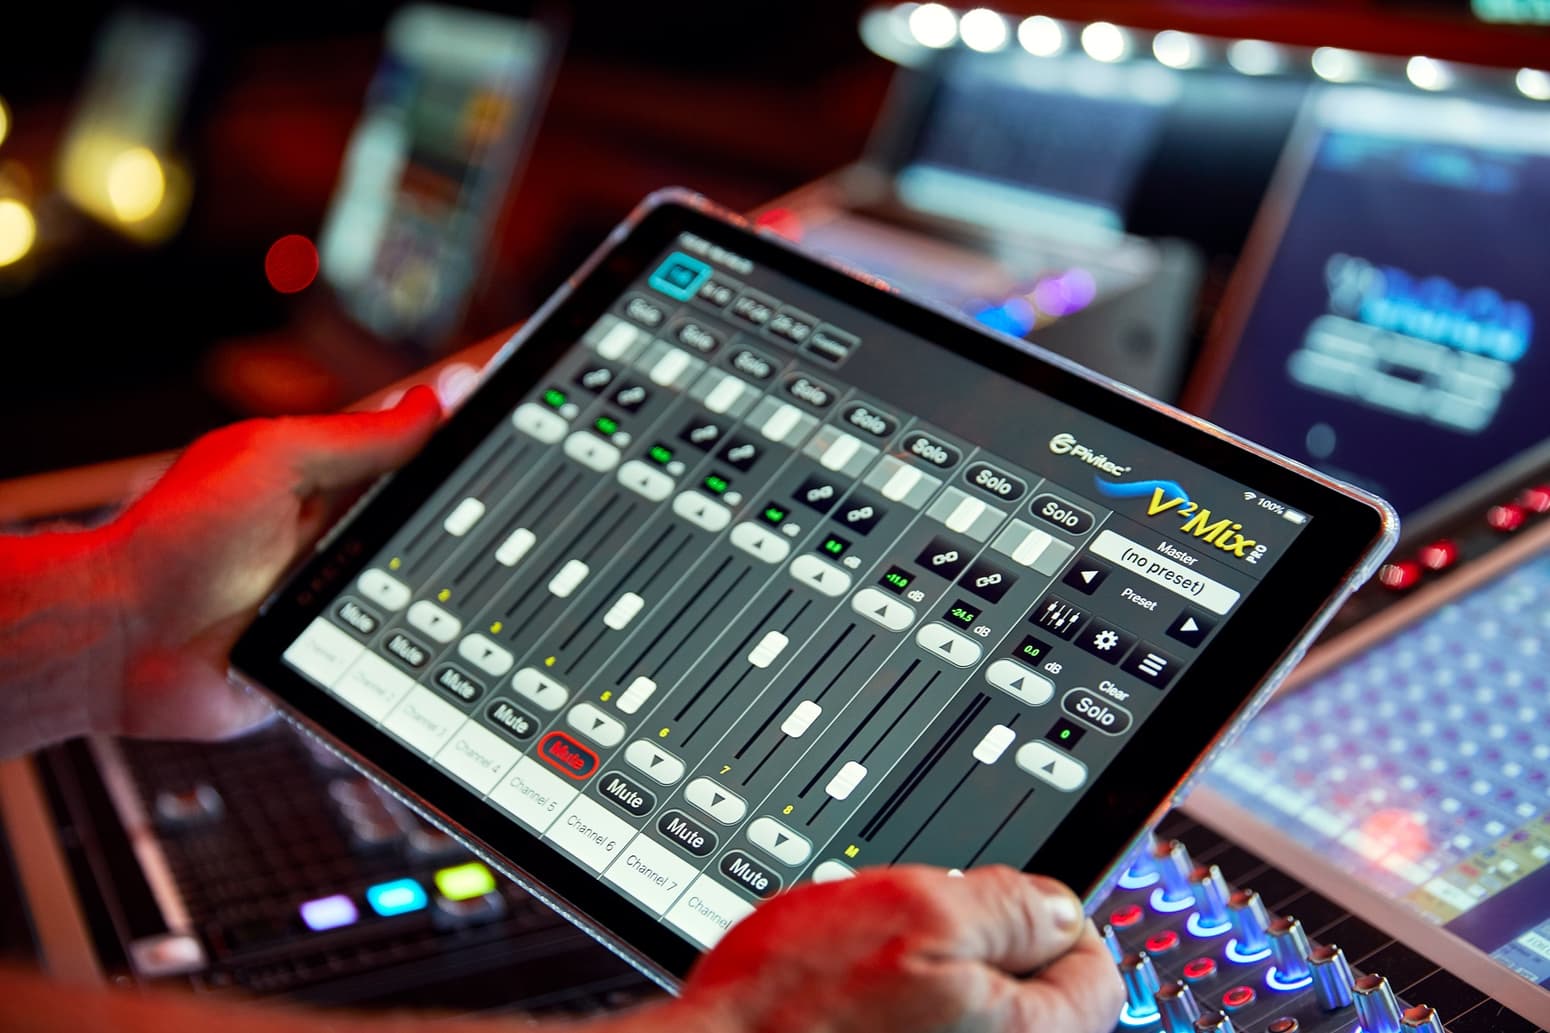 Modern controls make church sound systems at FBC easier to manage.